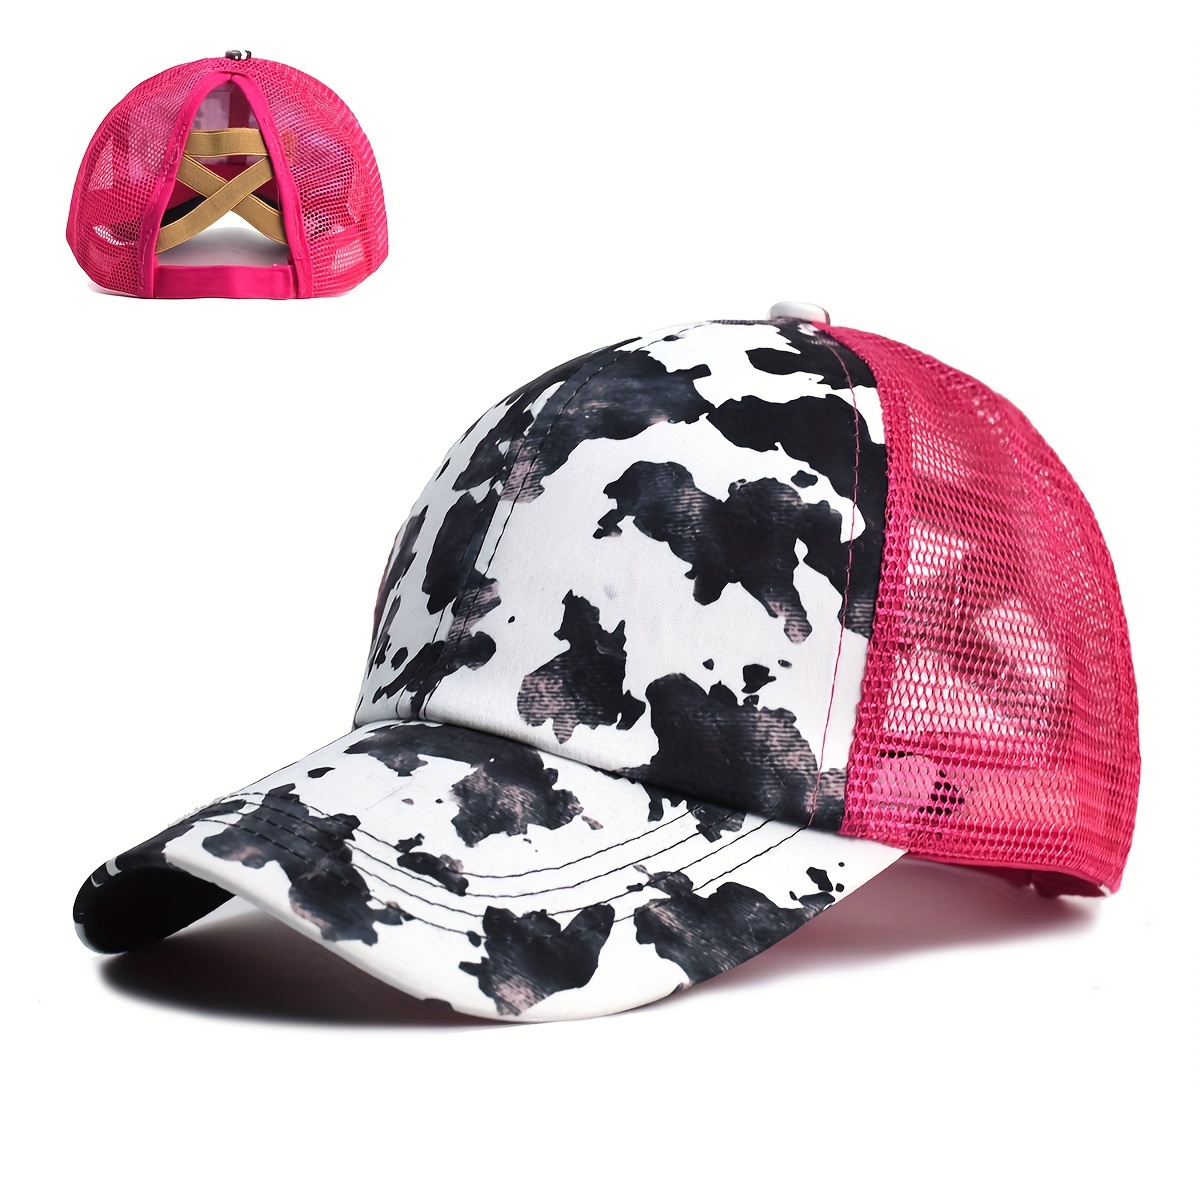 

Women's Ponytail Baseball Cap, Adjustable Mesh Trucker Hat With Tail Hole, Breathable Peaked Hat With Black & White Cow Print